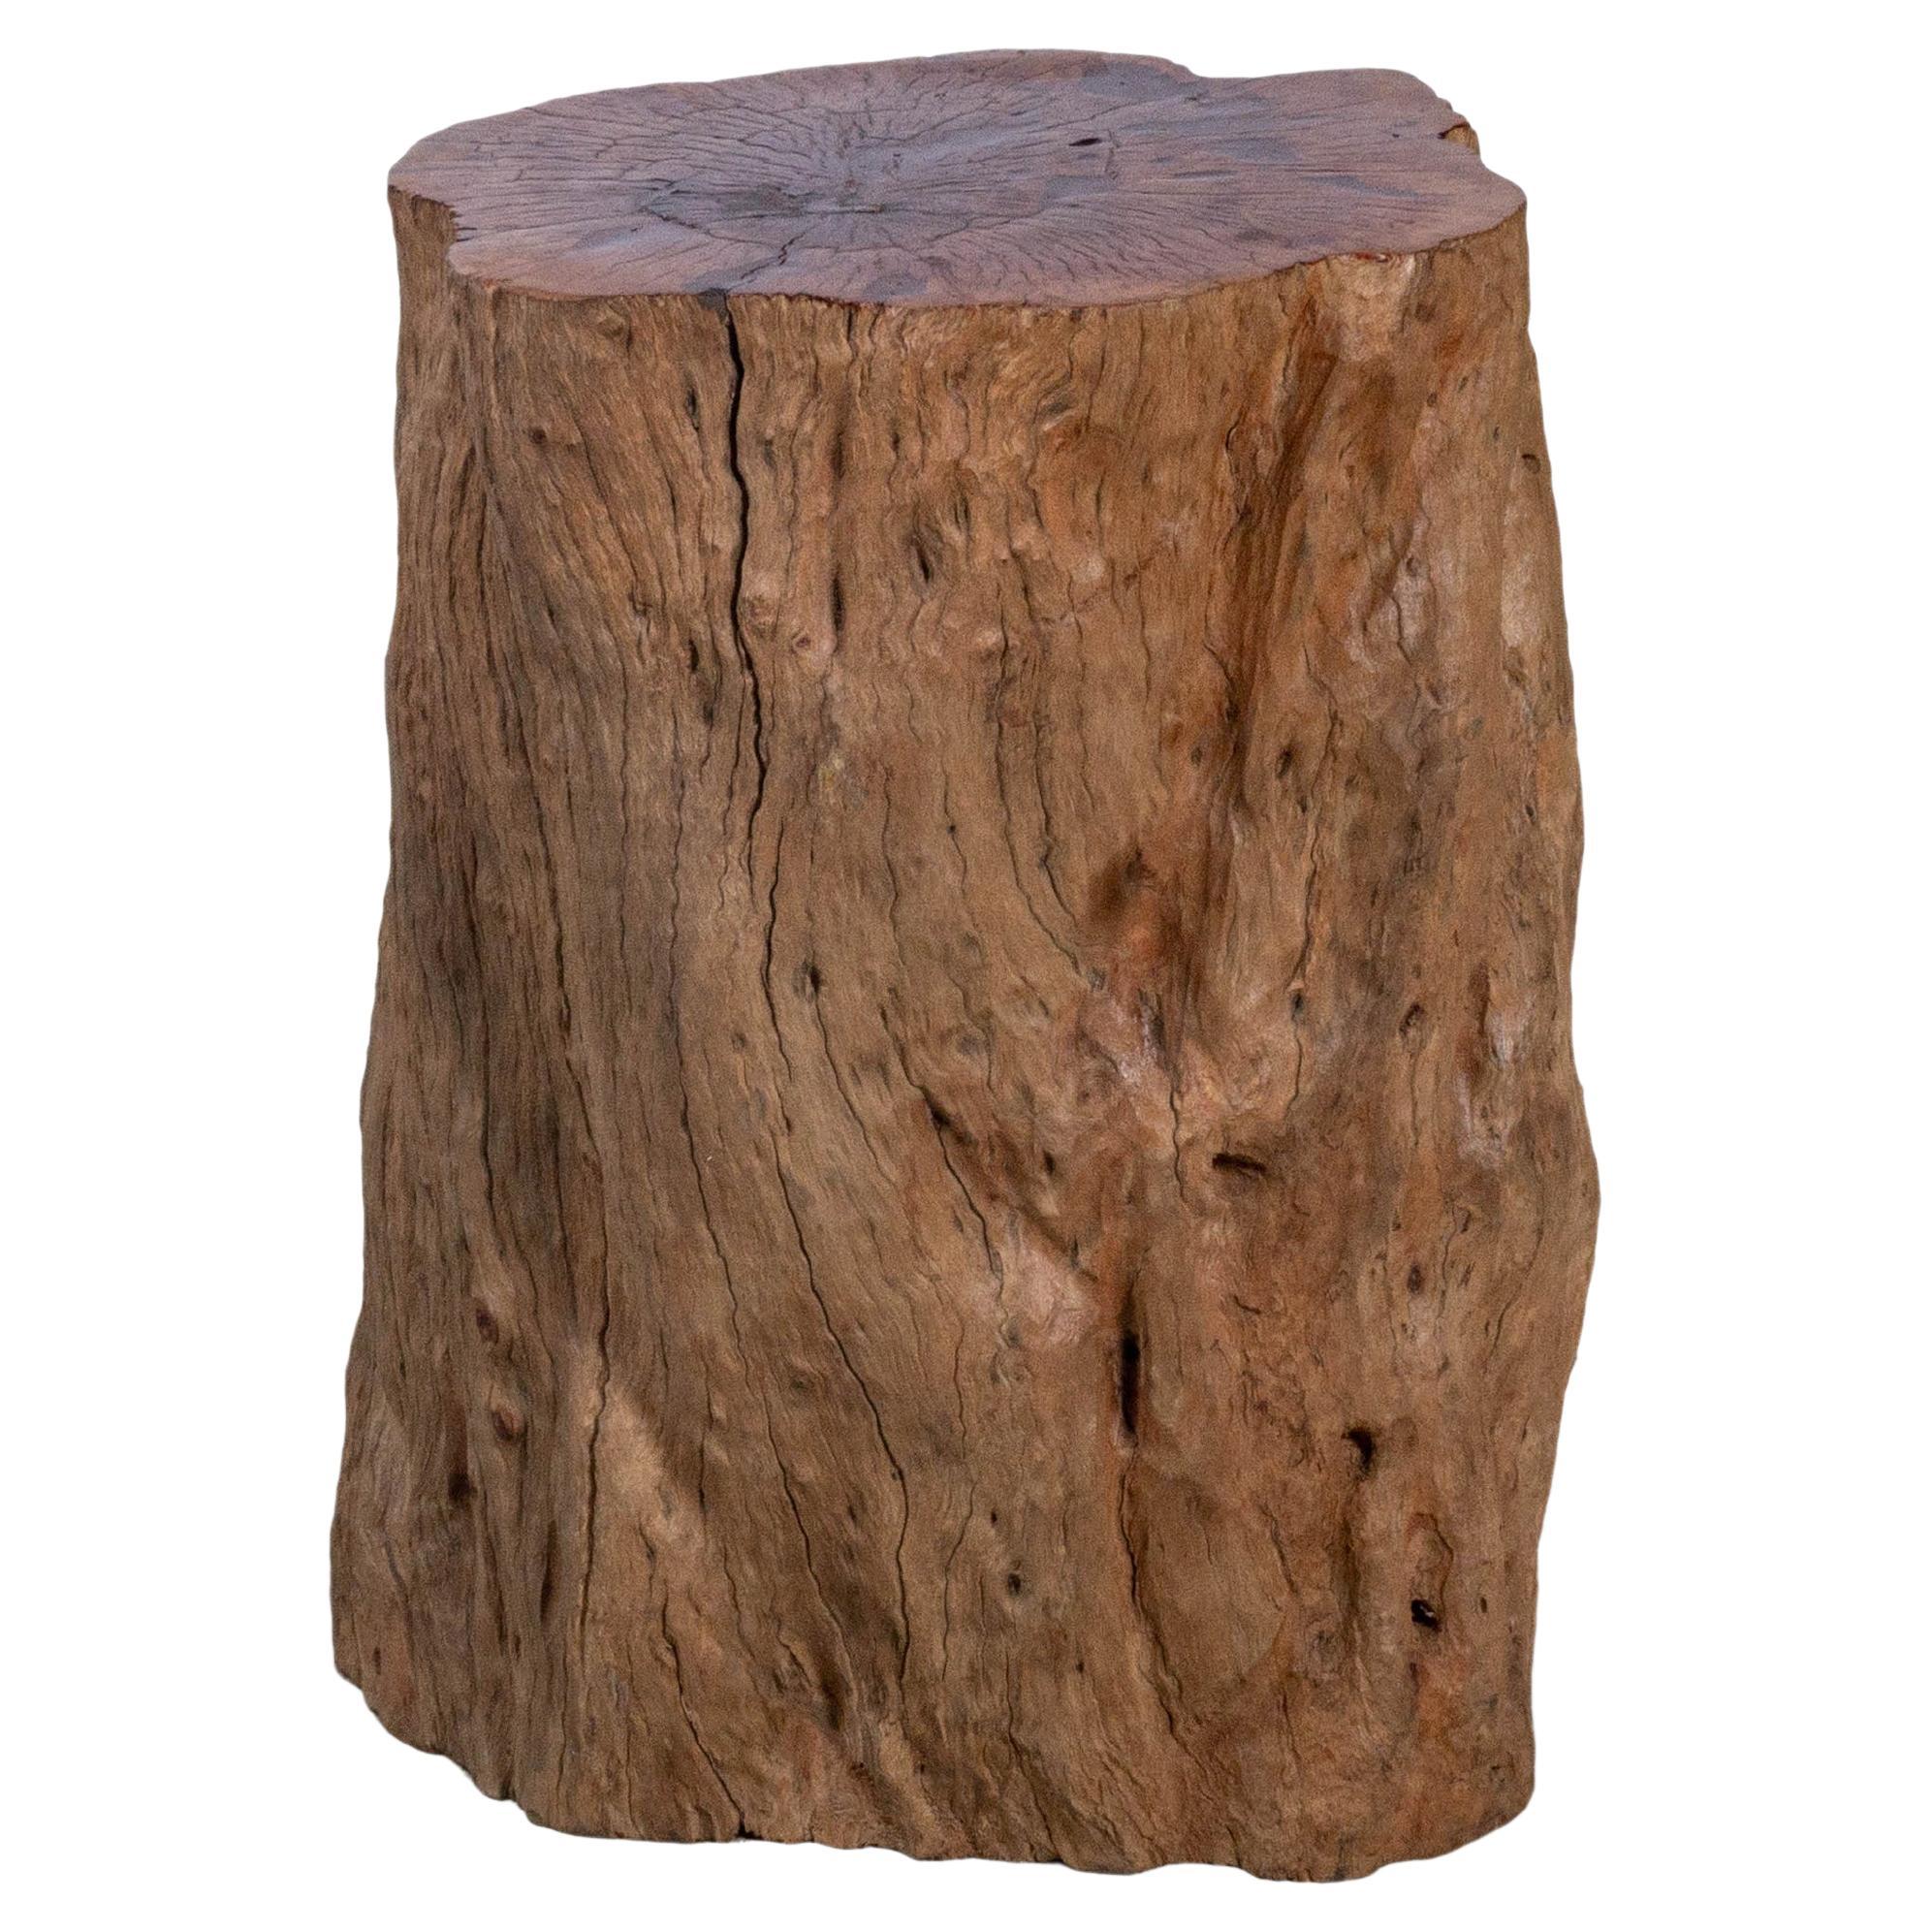 Lychee Wood Organic Form Side Table For Sale